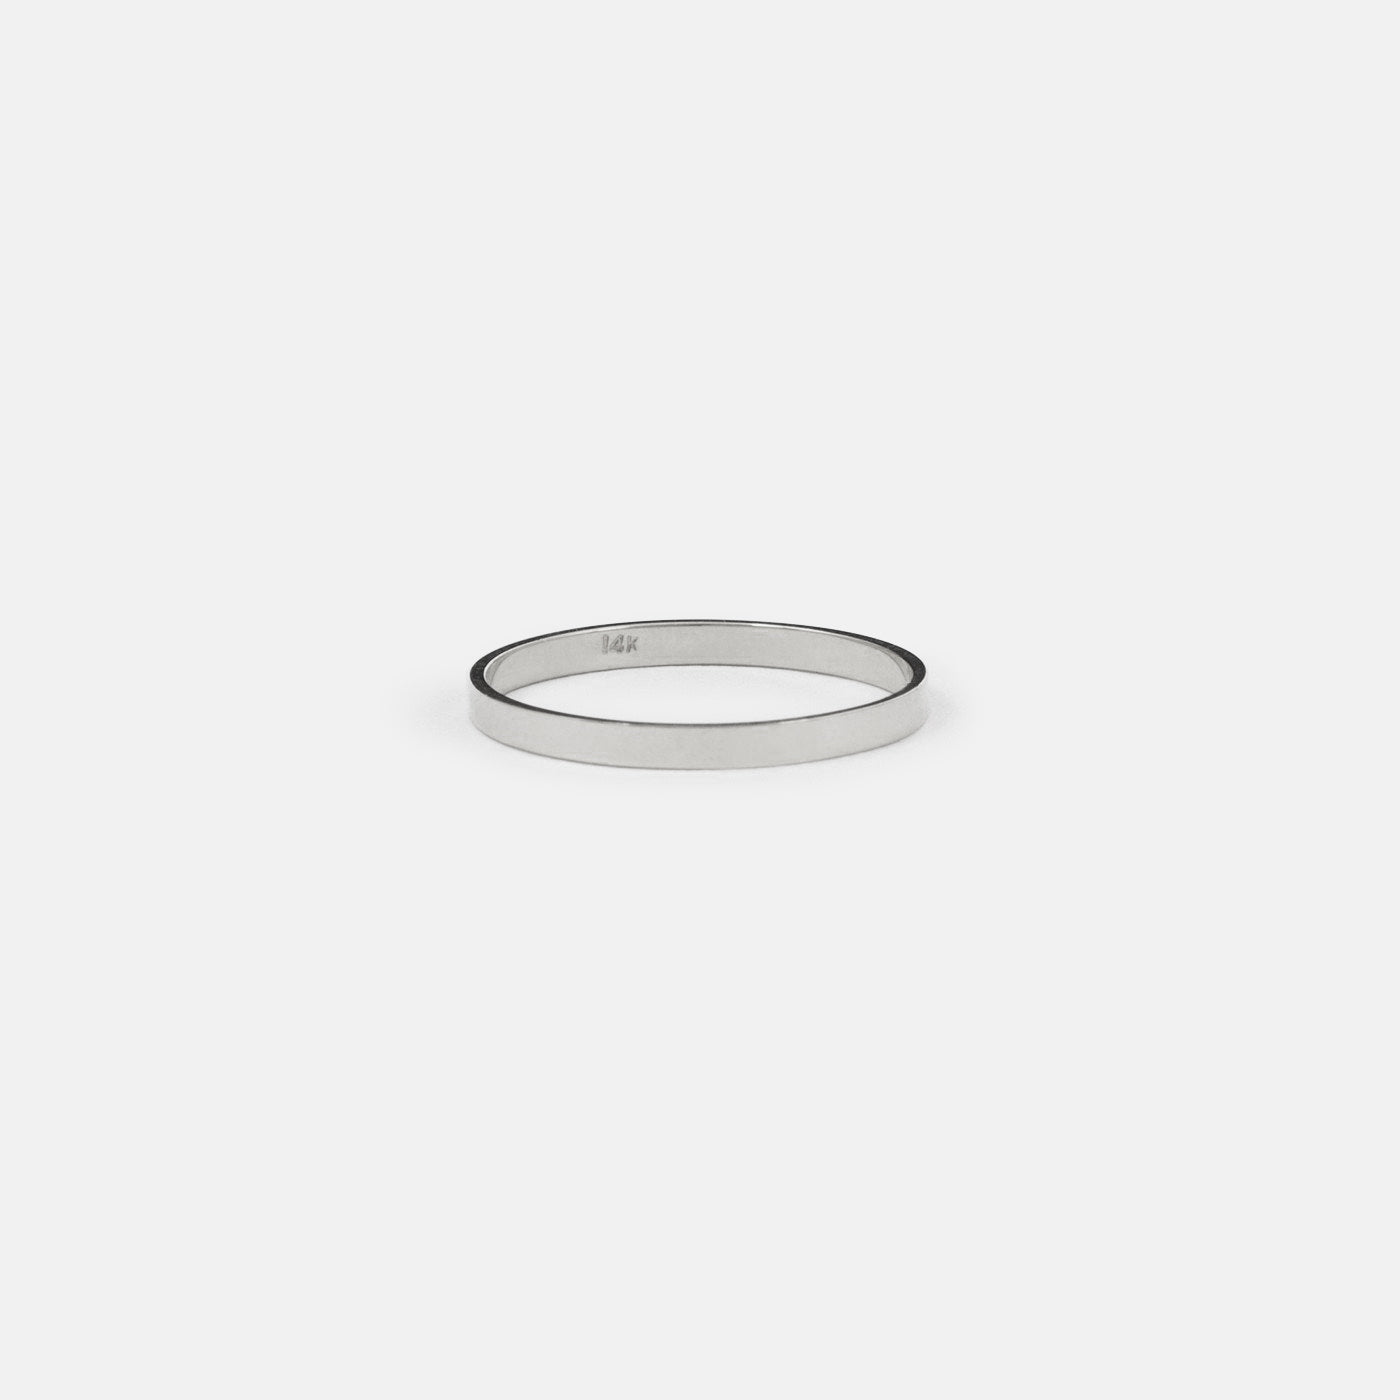 Rini Handmade Ring in 14k White Gold By SHW Fine Jewelry NYC